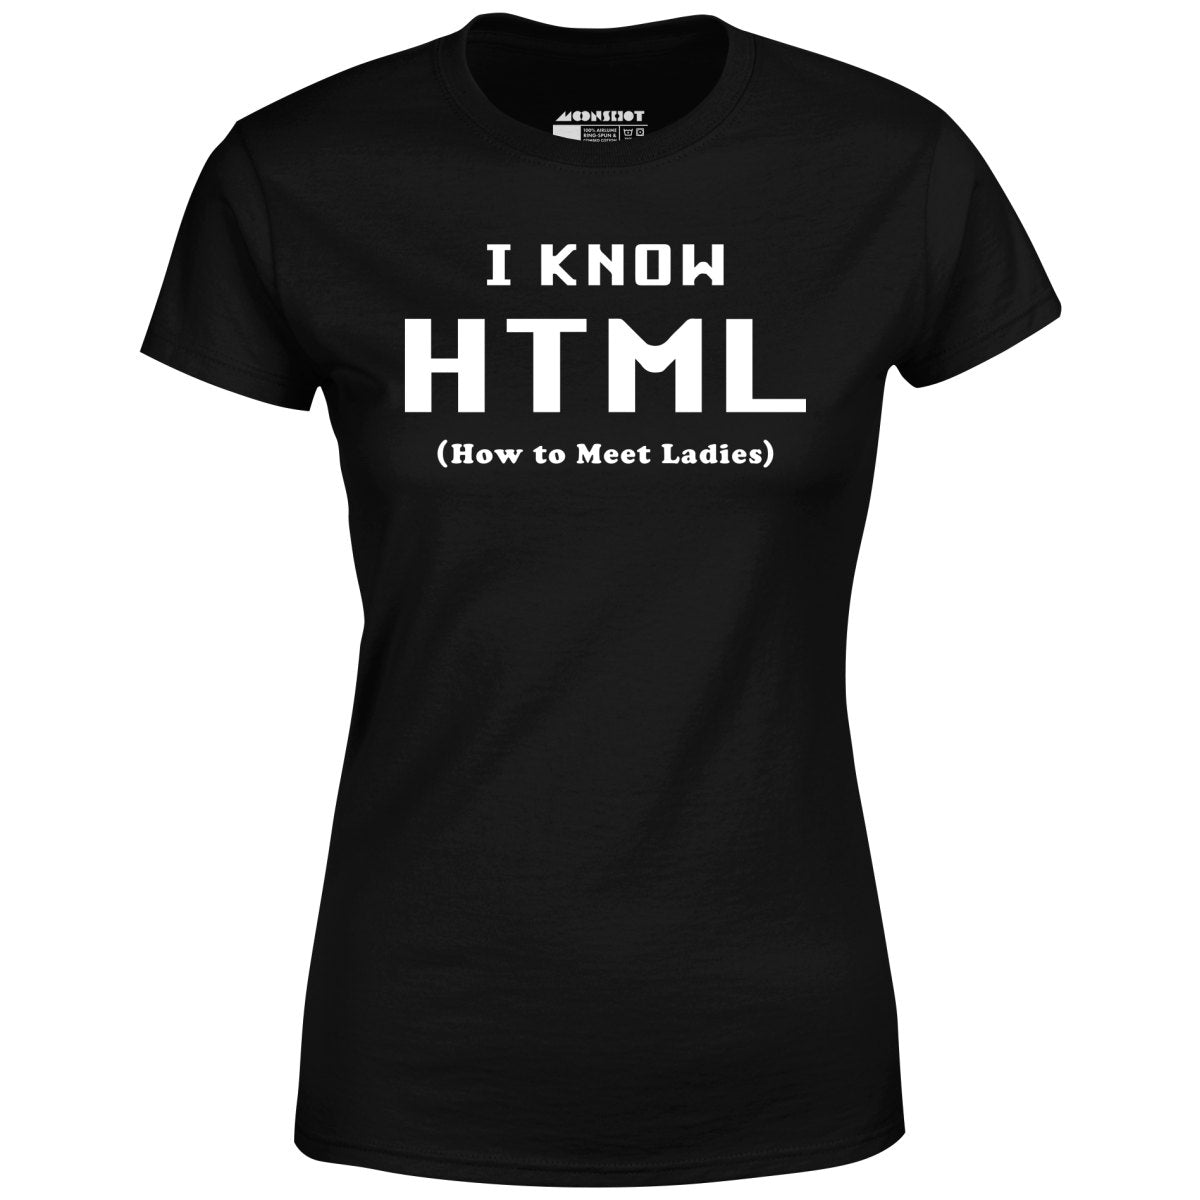 I Know HTML - How to Meet Ladies - Women's T-Shirt